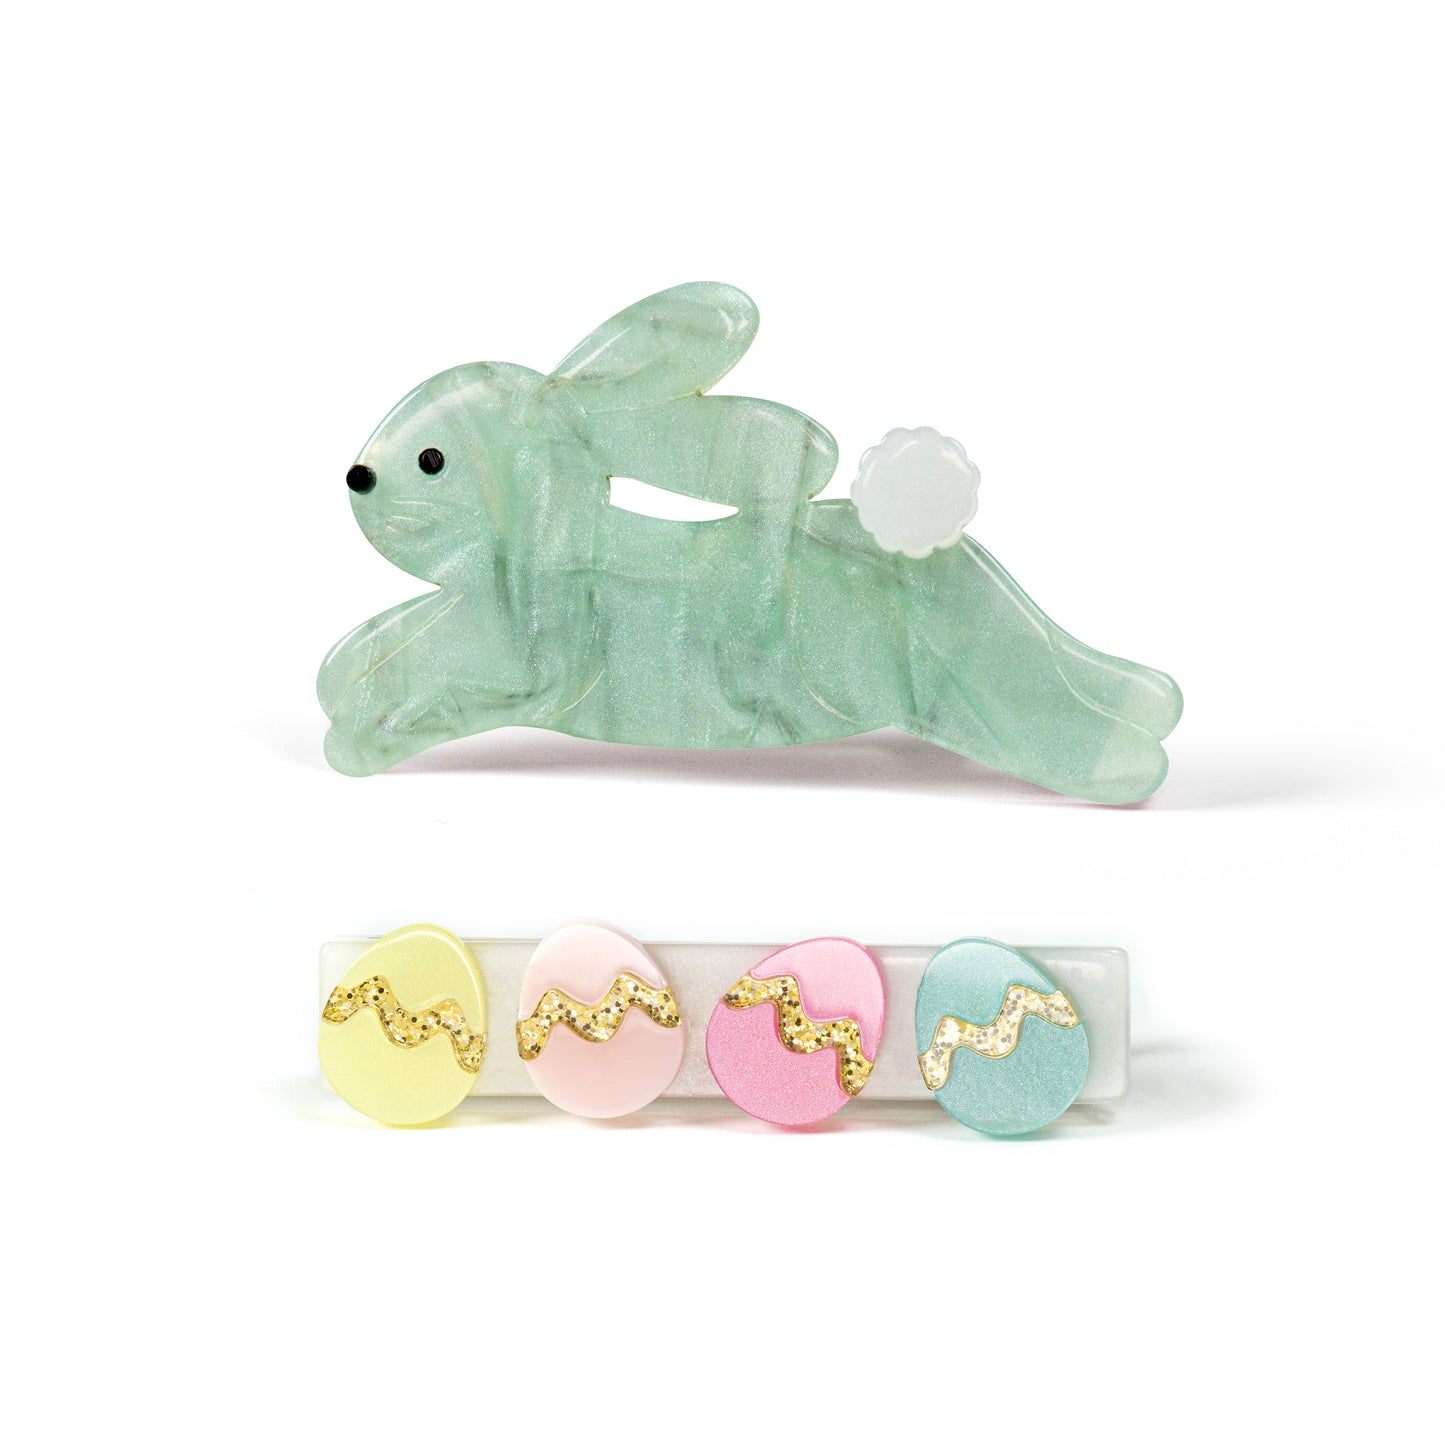 Pair of hair clips. One of them is adorned with a pearlized green bunny in hopping motion. The second one has 4 Easter eggs in pastel colors.